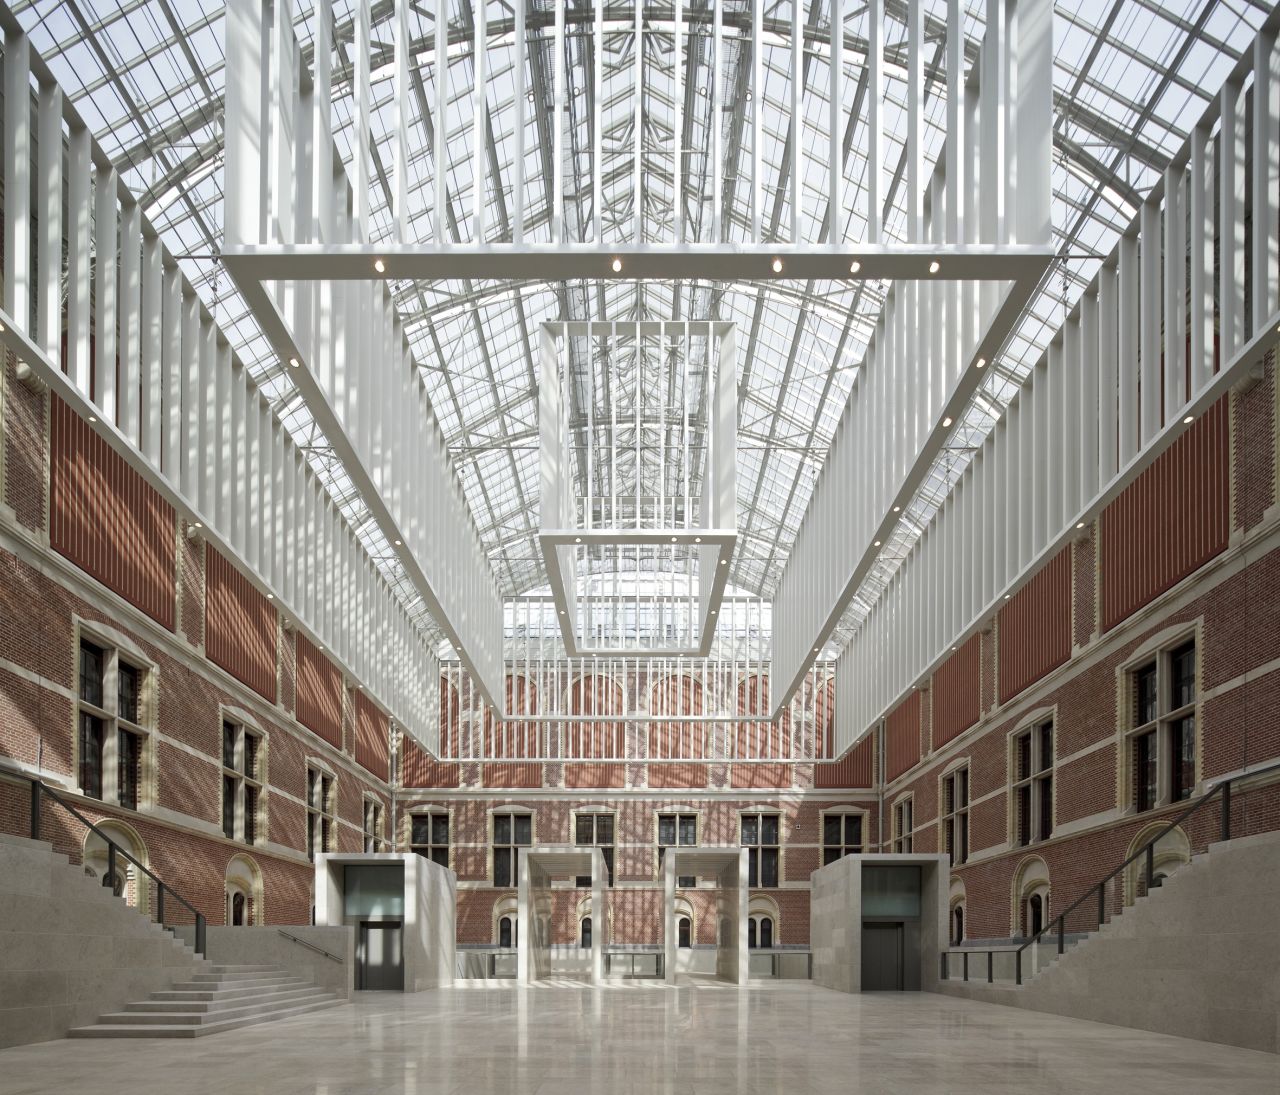 Contrasting ancient and modern, Spanish architects Cruz y Ortiz reinstated the building's original courtyards, which had been crammed with makeshift galleries for decades, linking them into one huge, bright and airy atrium.